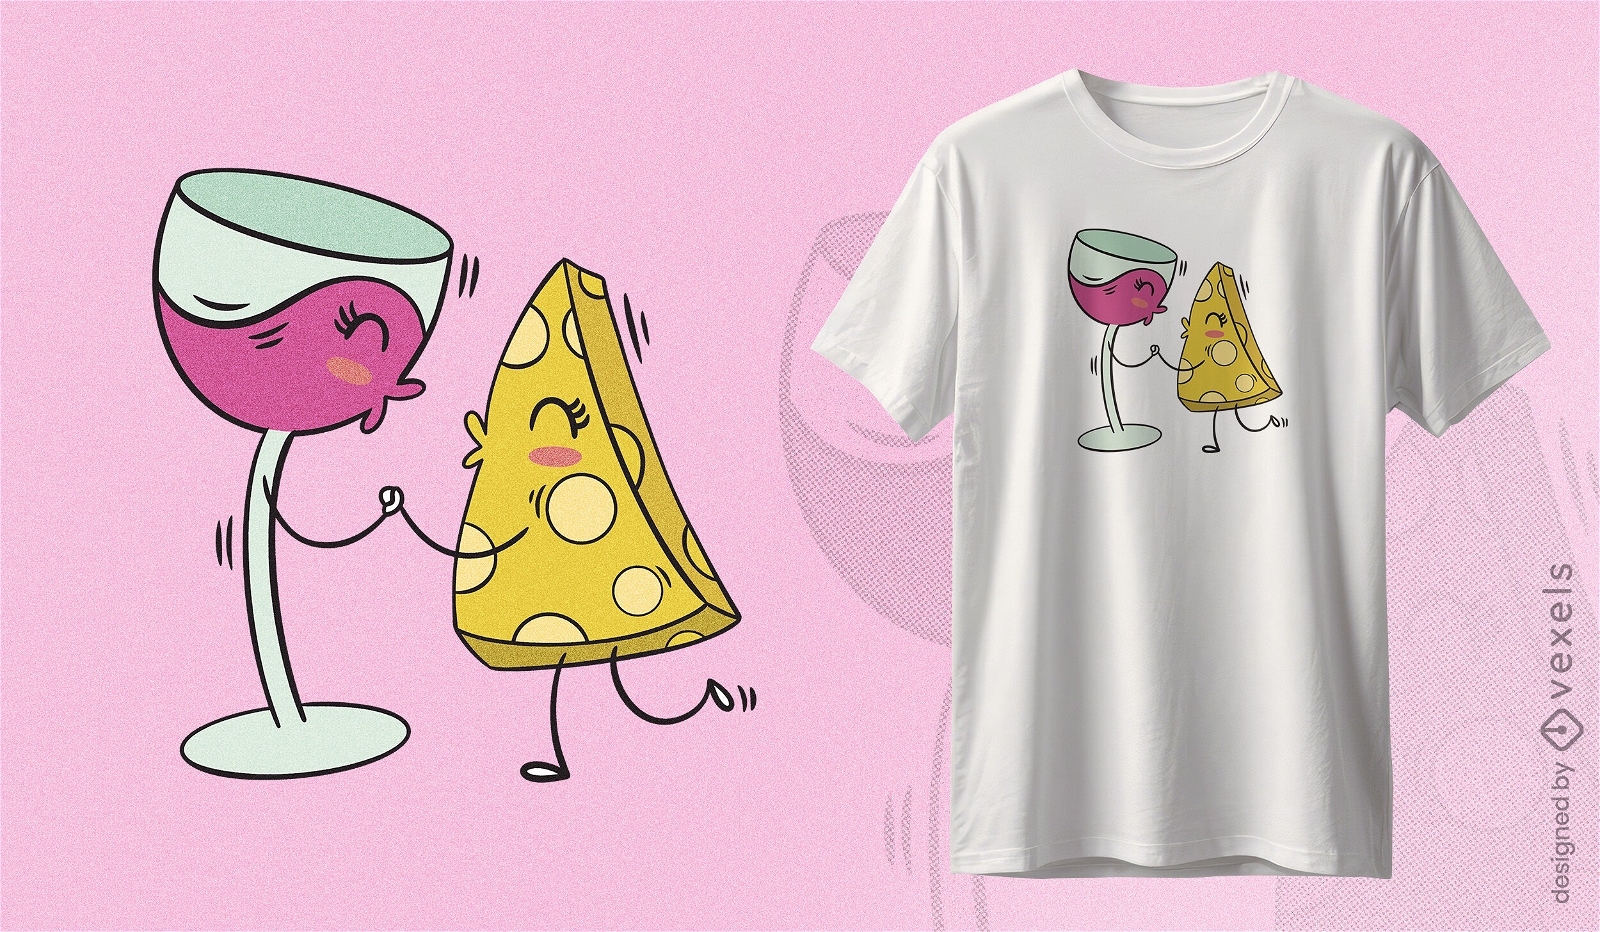 Wine and cheese conversation t-shirt design